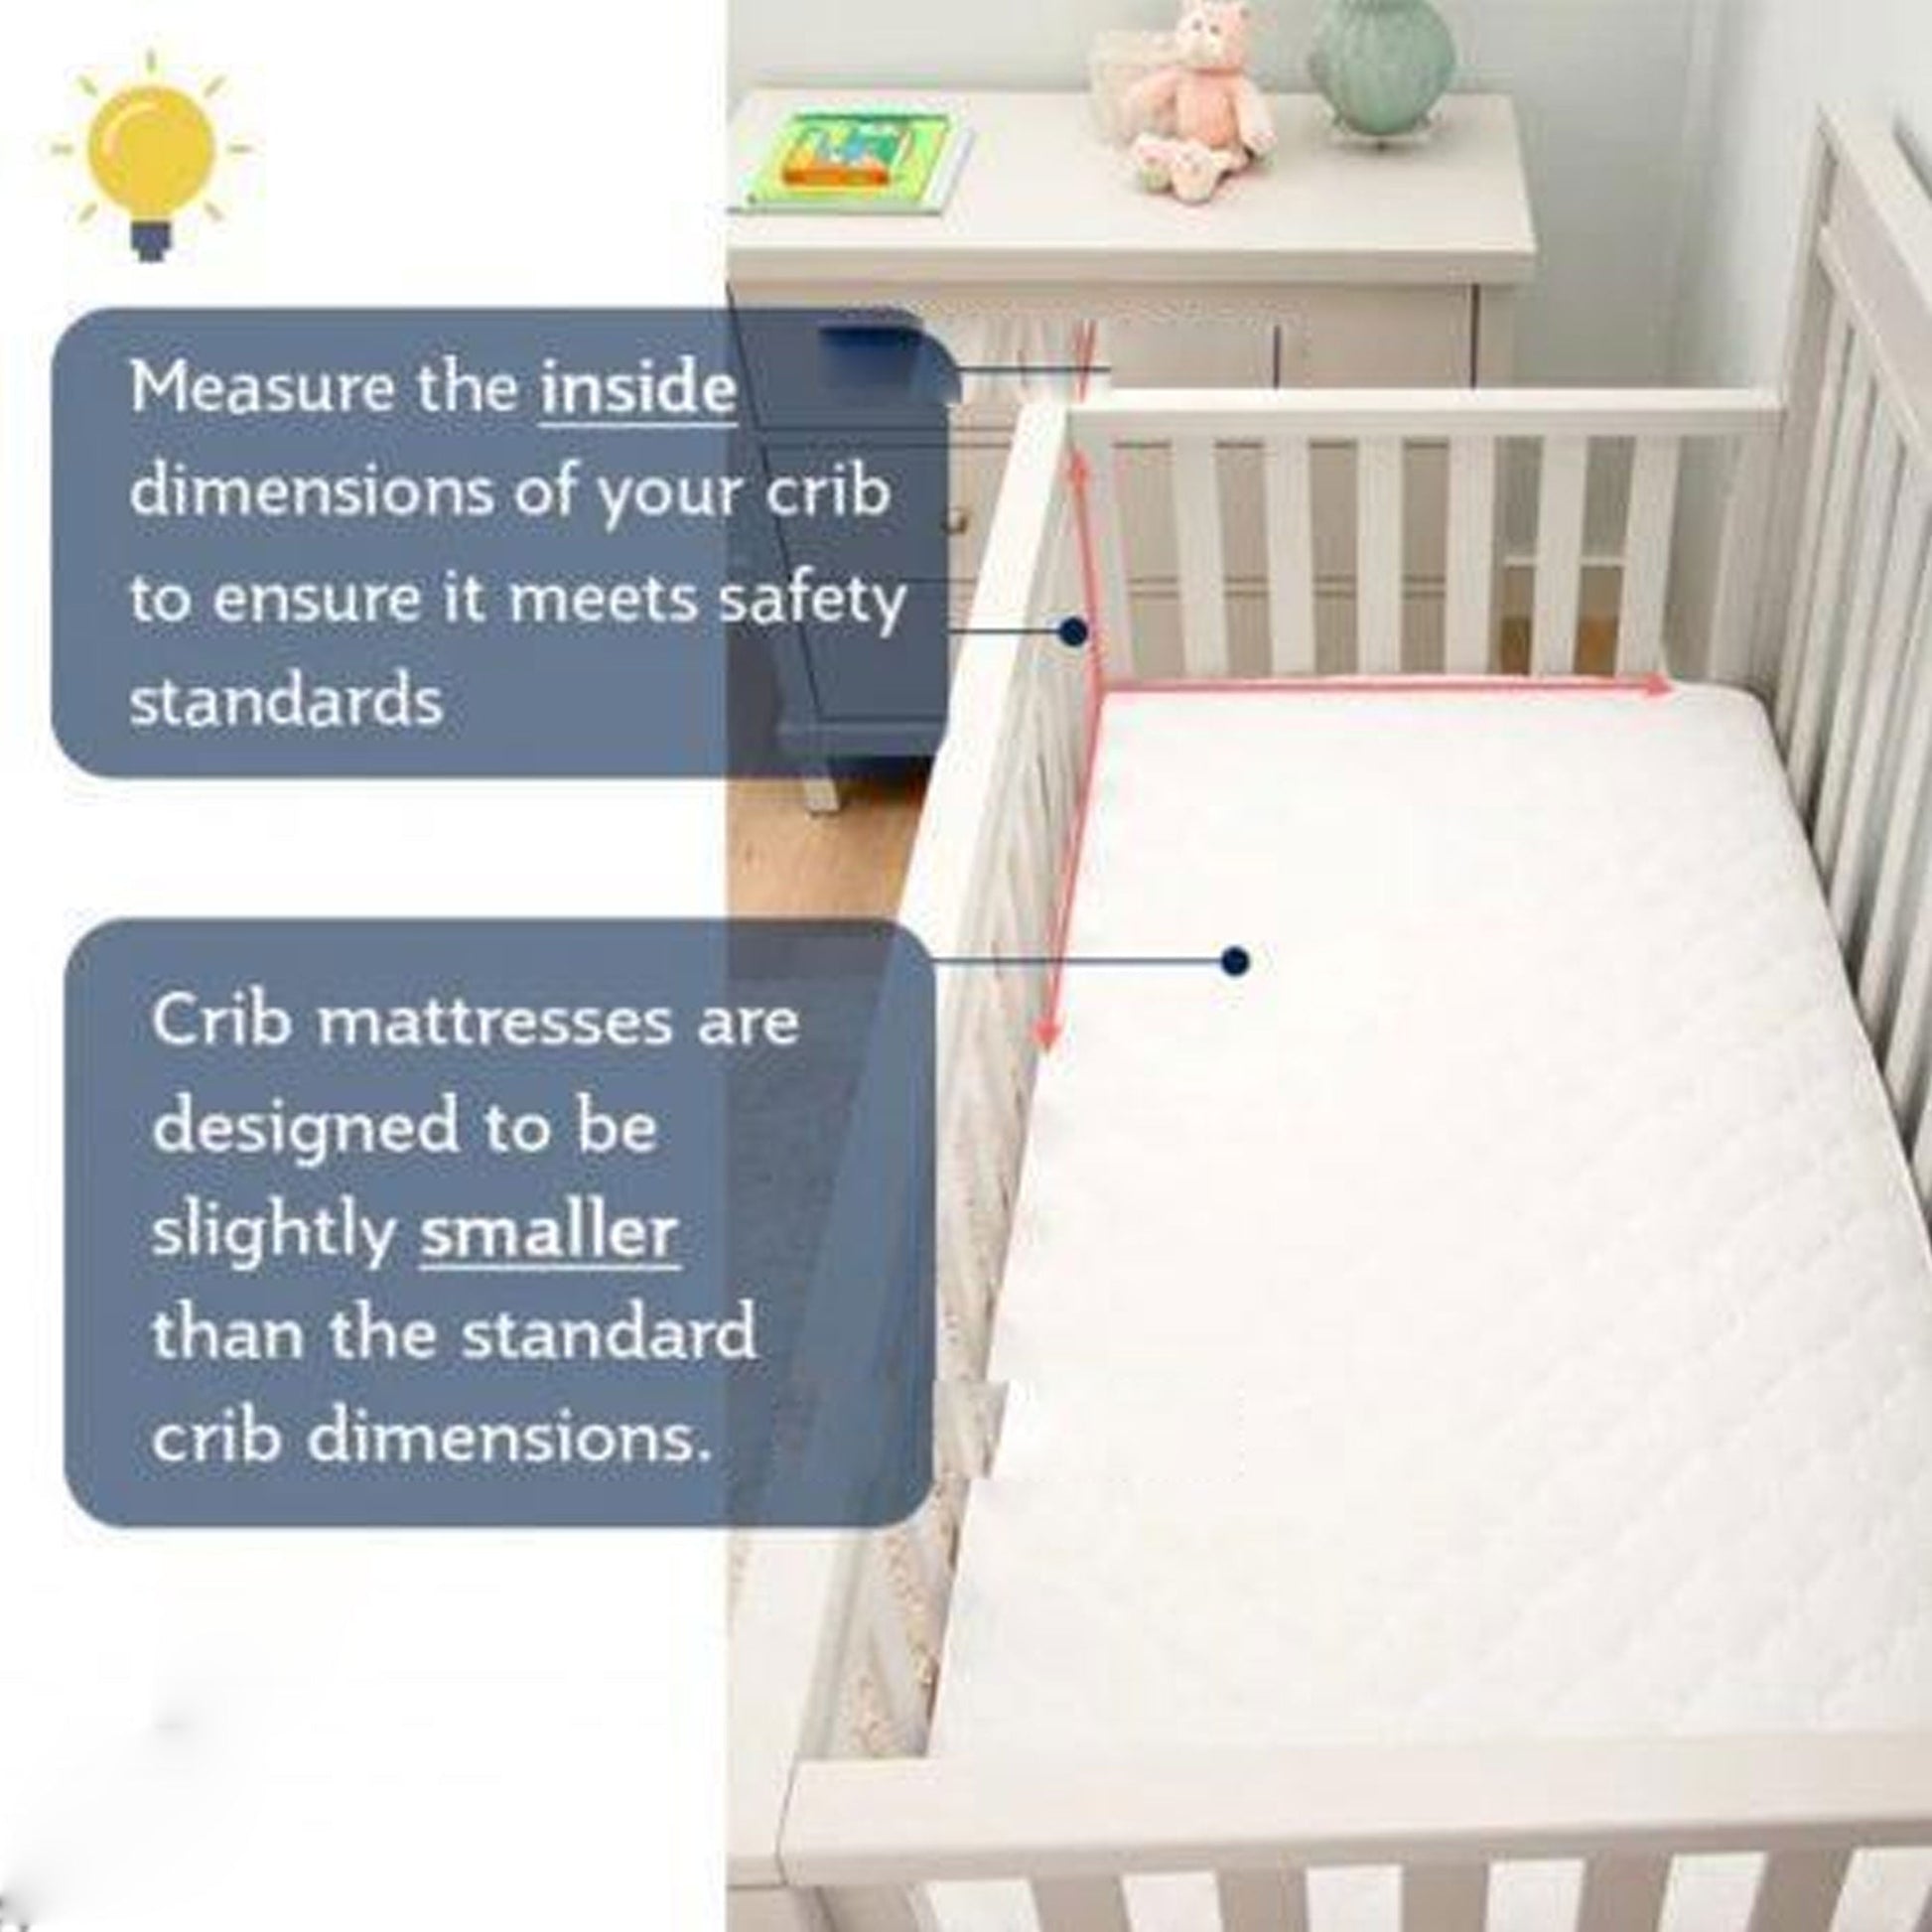 84 X 43 X 4 CM - CRIB Breathable Quilted Cot Baby Mattress - TheComfortshop.co.ukNursery Bedding0721718957195thecomfortshopTheComfortshop.co.ukCrib 84 x 4384 X 43 X 4 CM - CRIB Breathable Quilted Cot Baby Mattress - TheComfortshop.co.uk